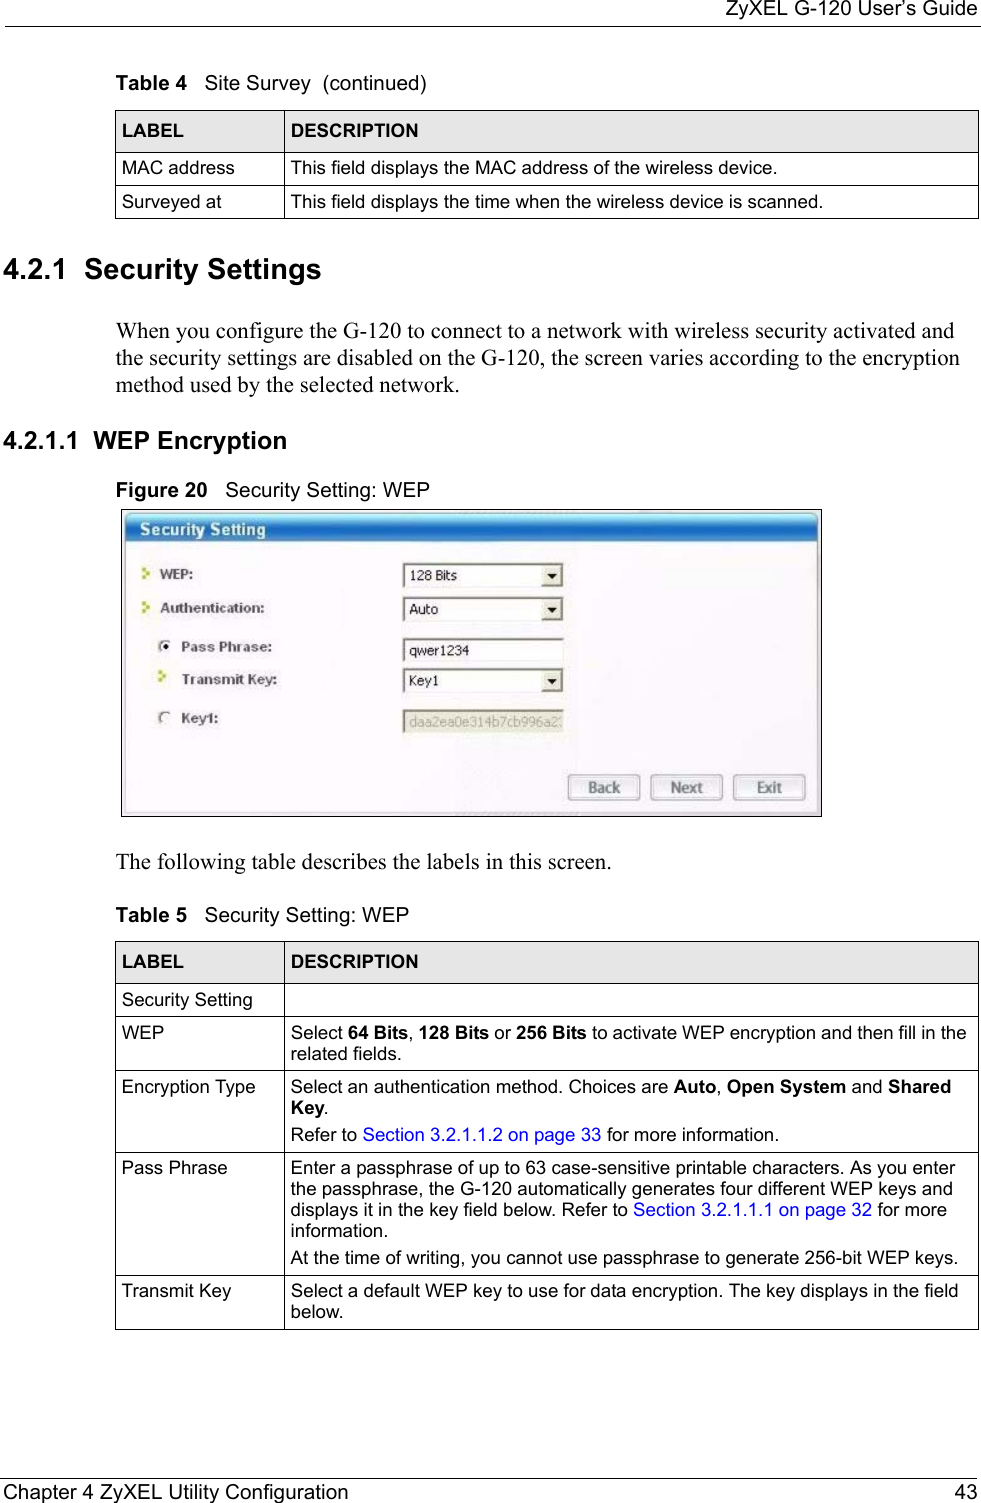 ZyXEL G-120 User’s GuideChapter 4 ZyXEL Utility Configuration 434.2.1  Security Settings When you configure the G-120 to connect to a network with wireless security activated and the security settings are disabled on the G-120, the screen varies according to the encryption method used by the selected network.4.2.1.1  WEP EncryptionFigure 20   Security Setting: WEP  The following table describes the labels in this screen.  MAC address  This field displays the MAC address of the wireless device.Surveyed at  This field displays the time when the wireless device is scanned.Table 4   Site Survey  (continued)LABEL DESCRIPTIONTable 5   Security Setting: WEP LABEL DESCRIPTIONSecurity SettingWEP Select 64 Bits, 128 Bits or 256 Bits to activate WEP encryption and then fill in the related fields.Encryption Type Select an authentication method. Choices are Auto, Open System and Shared Key.Refer to Section 3.2.1.1.2 on page 33 for more information.Pass Phrase Enter a passphrase of up to 63 case-sensitive printable characters. As you enter the passphrase, the G-120 automatically generates four different WEP keys and displays it in the key field below. Refer to Section 3.2.1.1.1 on page 32 for more information.At the time of writing, you cannot use passphrase to generate 256-bit WEP keys.Transmit Key Select a default WEP key to use for data encryption. The key displays in the field below.